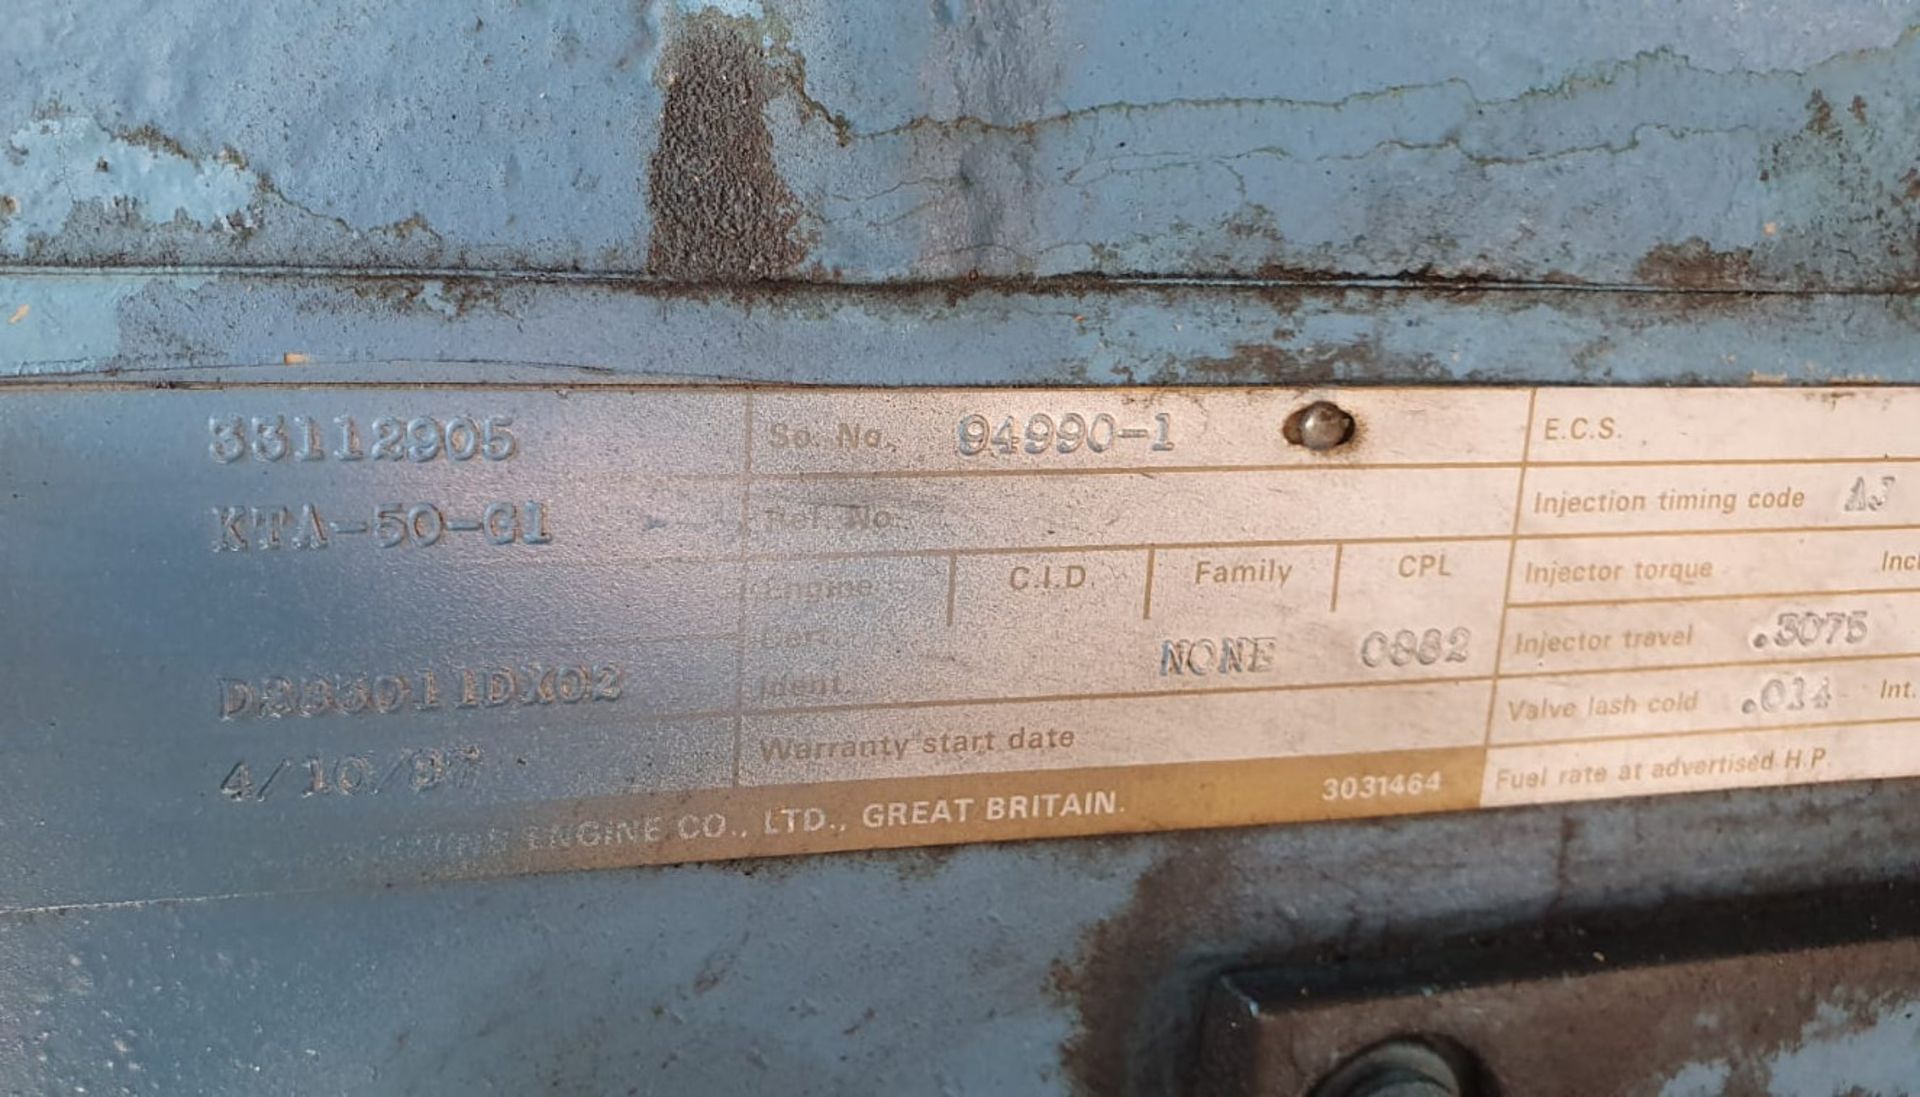 1 x 1987 Hitzinger SGS 9D 040 Generator - Only 800 Hours Use - Ref: T4UB/HZ - CL333 - Location: - Image 4 of 20